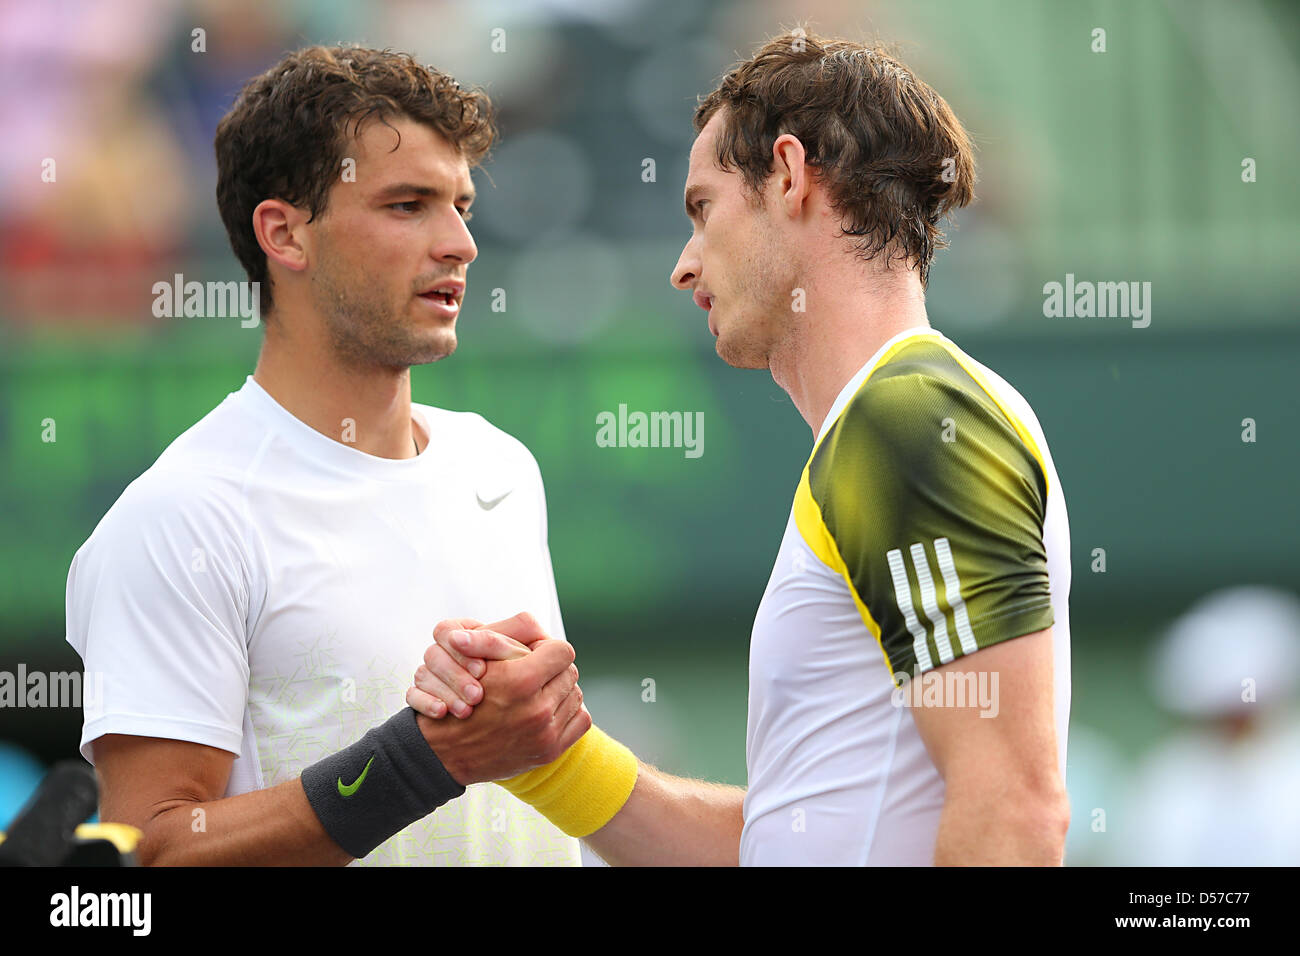 Miami, Florida, USA. 25th March 2013.  Andy Murray of Great Britain and Grigor Dimitrov of Bulgaria shake hands after the match during the Sony Open 2013. Credit: Mauricio Paiz / Alamy Live News Stock Photo